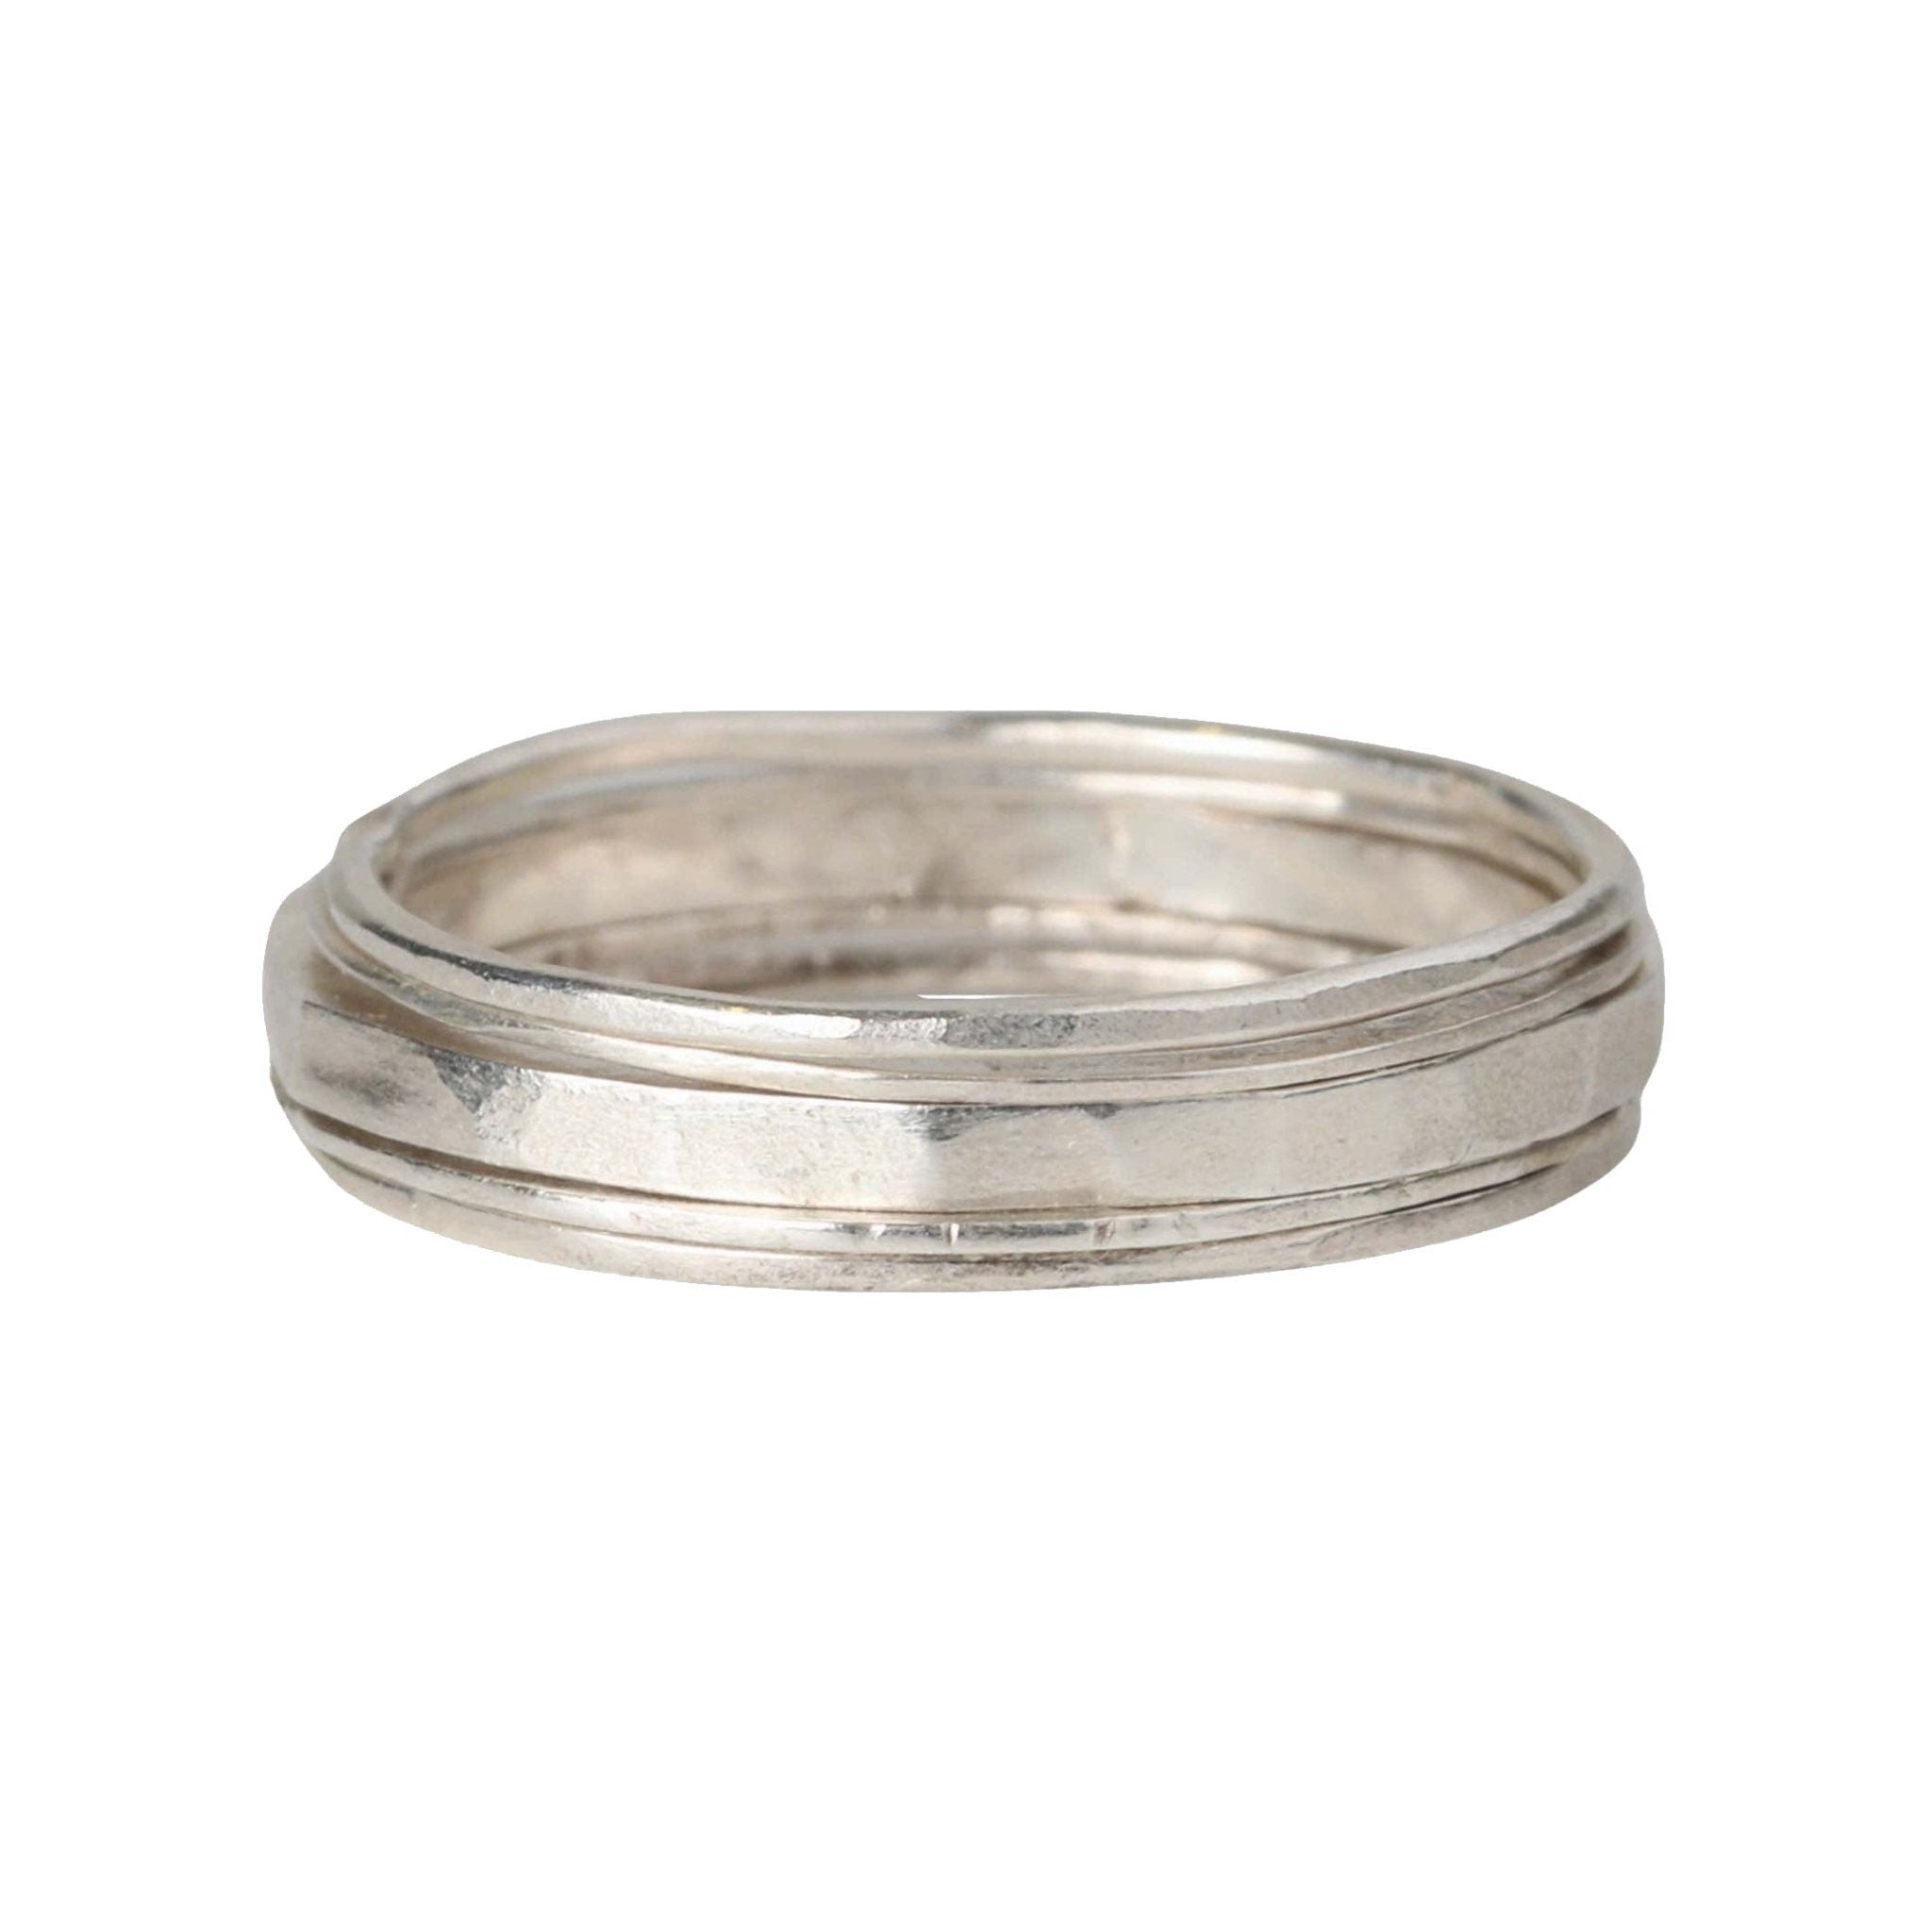 Sarah Macfadden Set of 5 Sterling Silver Hammered Stacking Rings with Varying Thickness